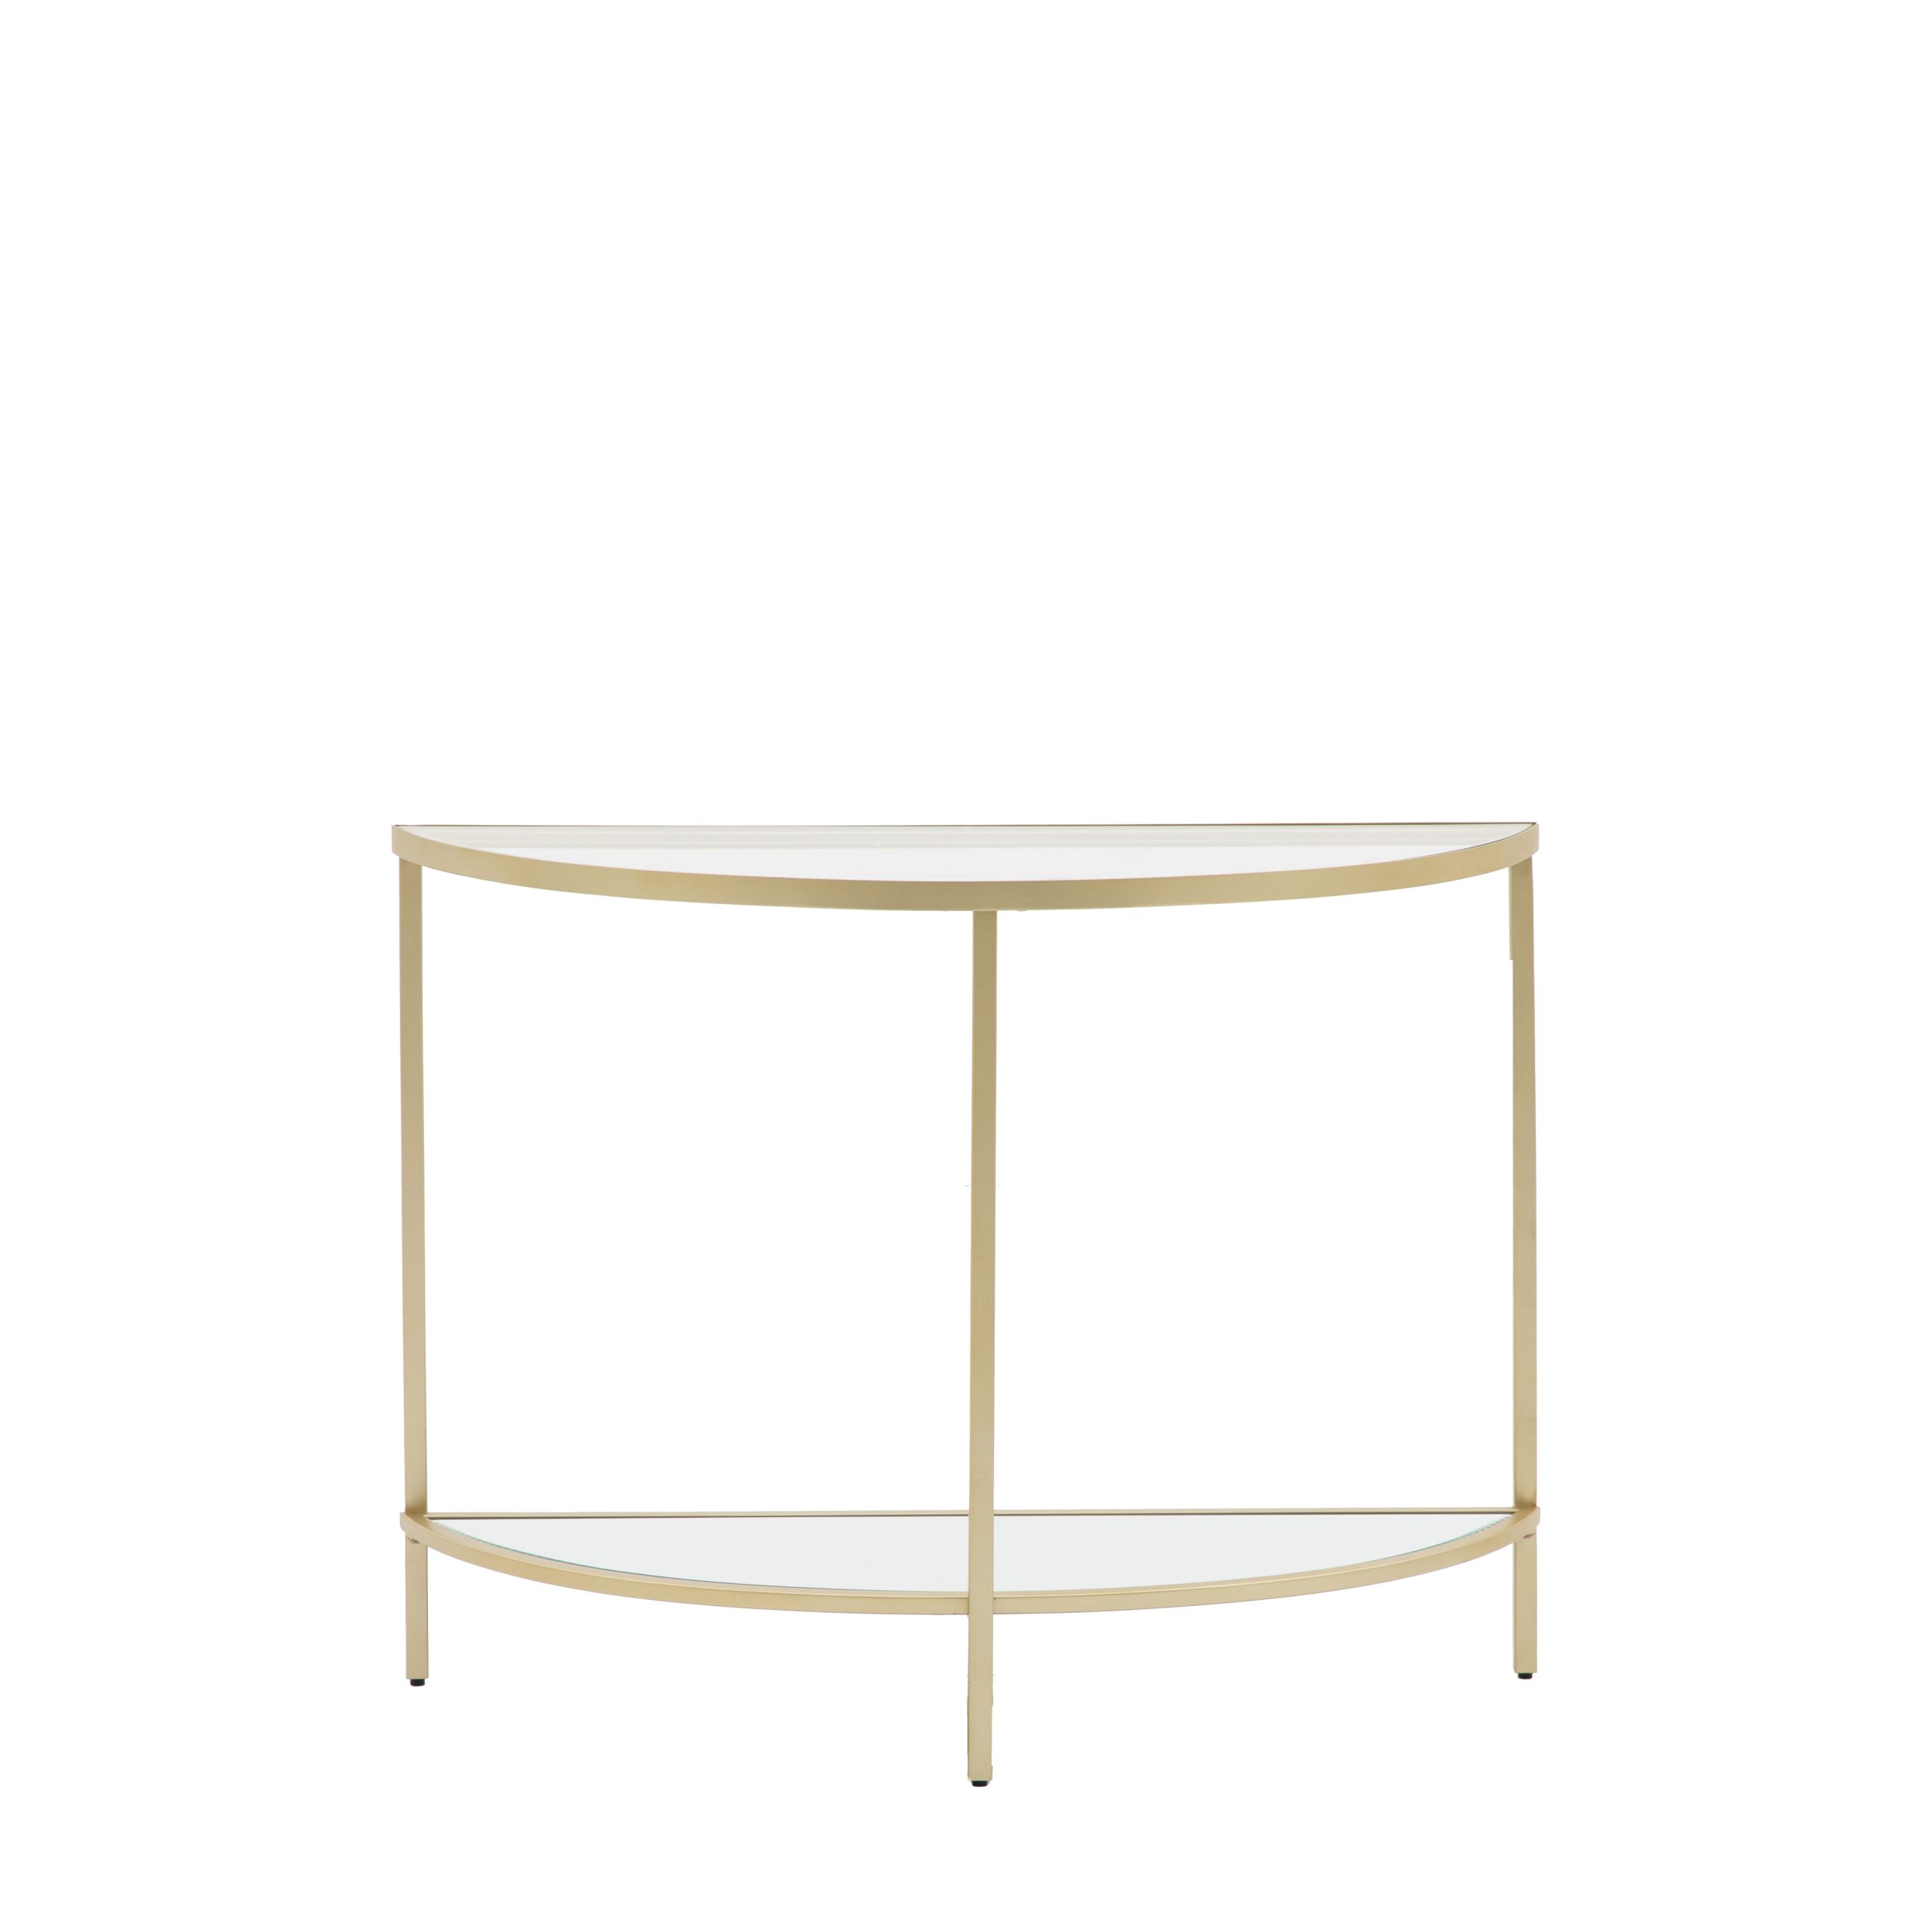 Gallery Direct Hudson Console Table Champagne